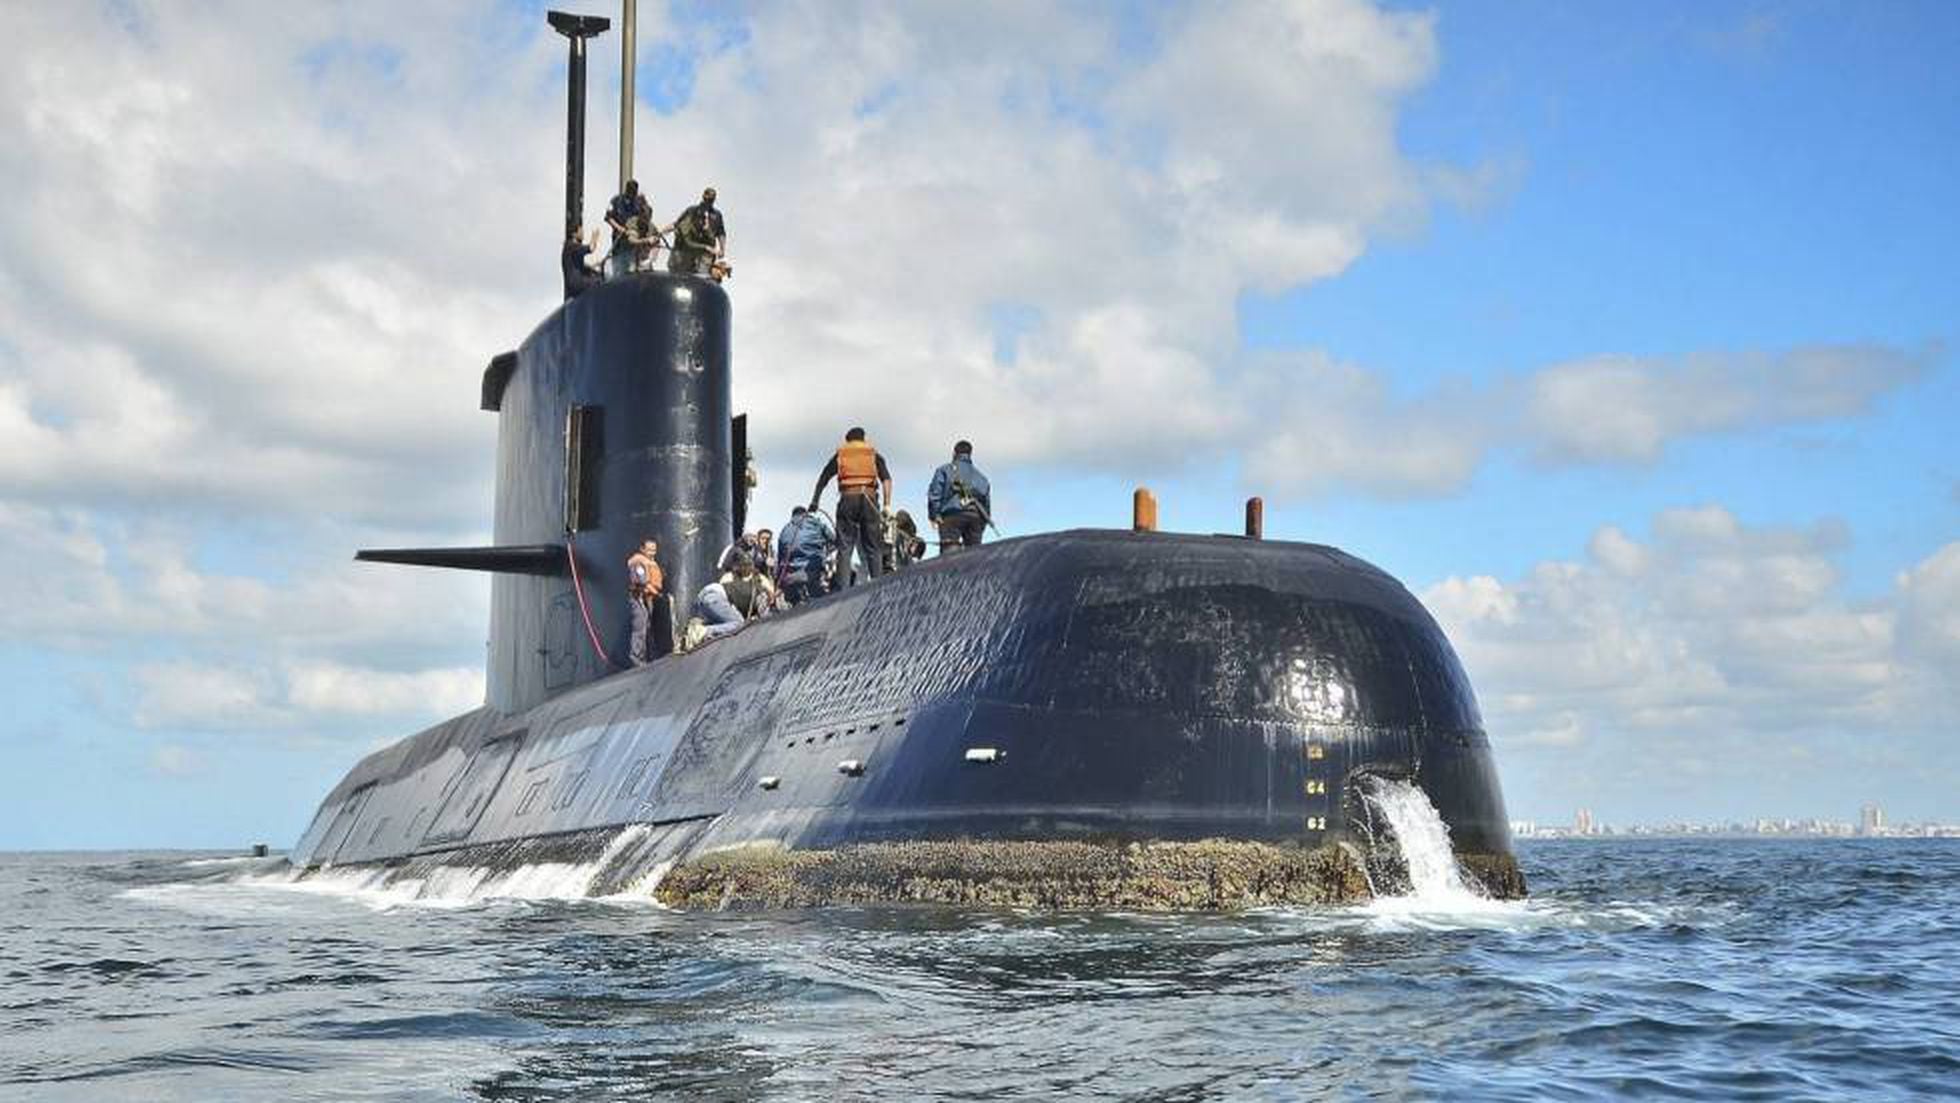 On November 15, 2017, communication with the ARA San Juan submarine with 44 crew members on board is lost in Argentina.